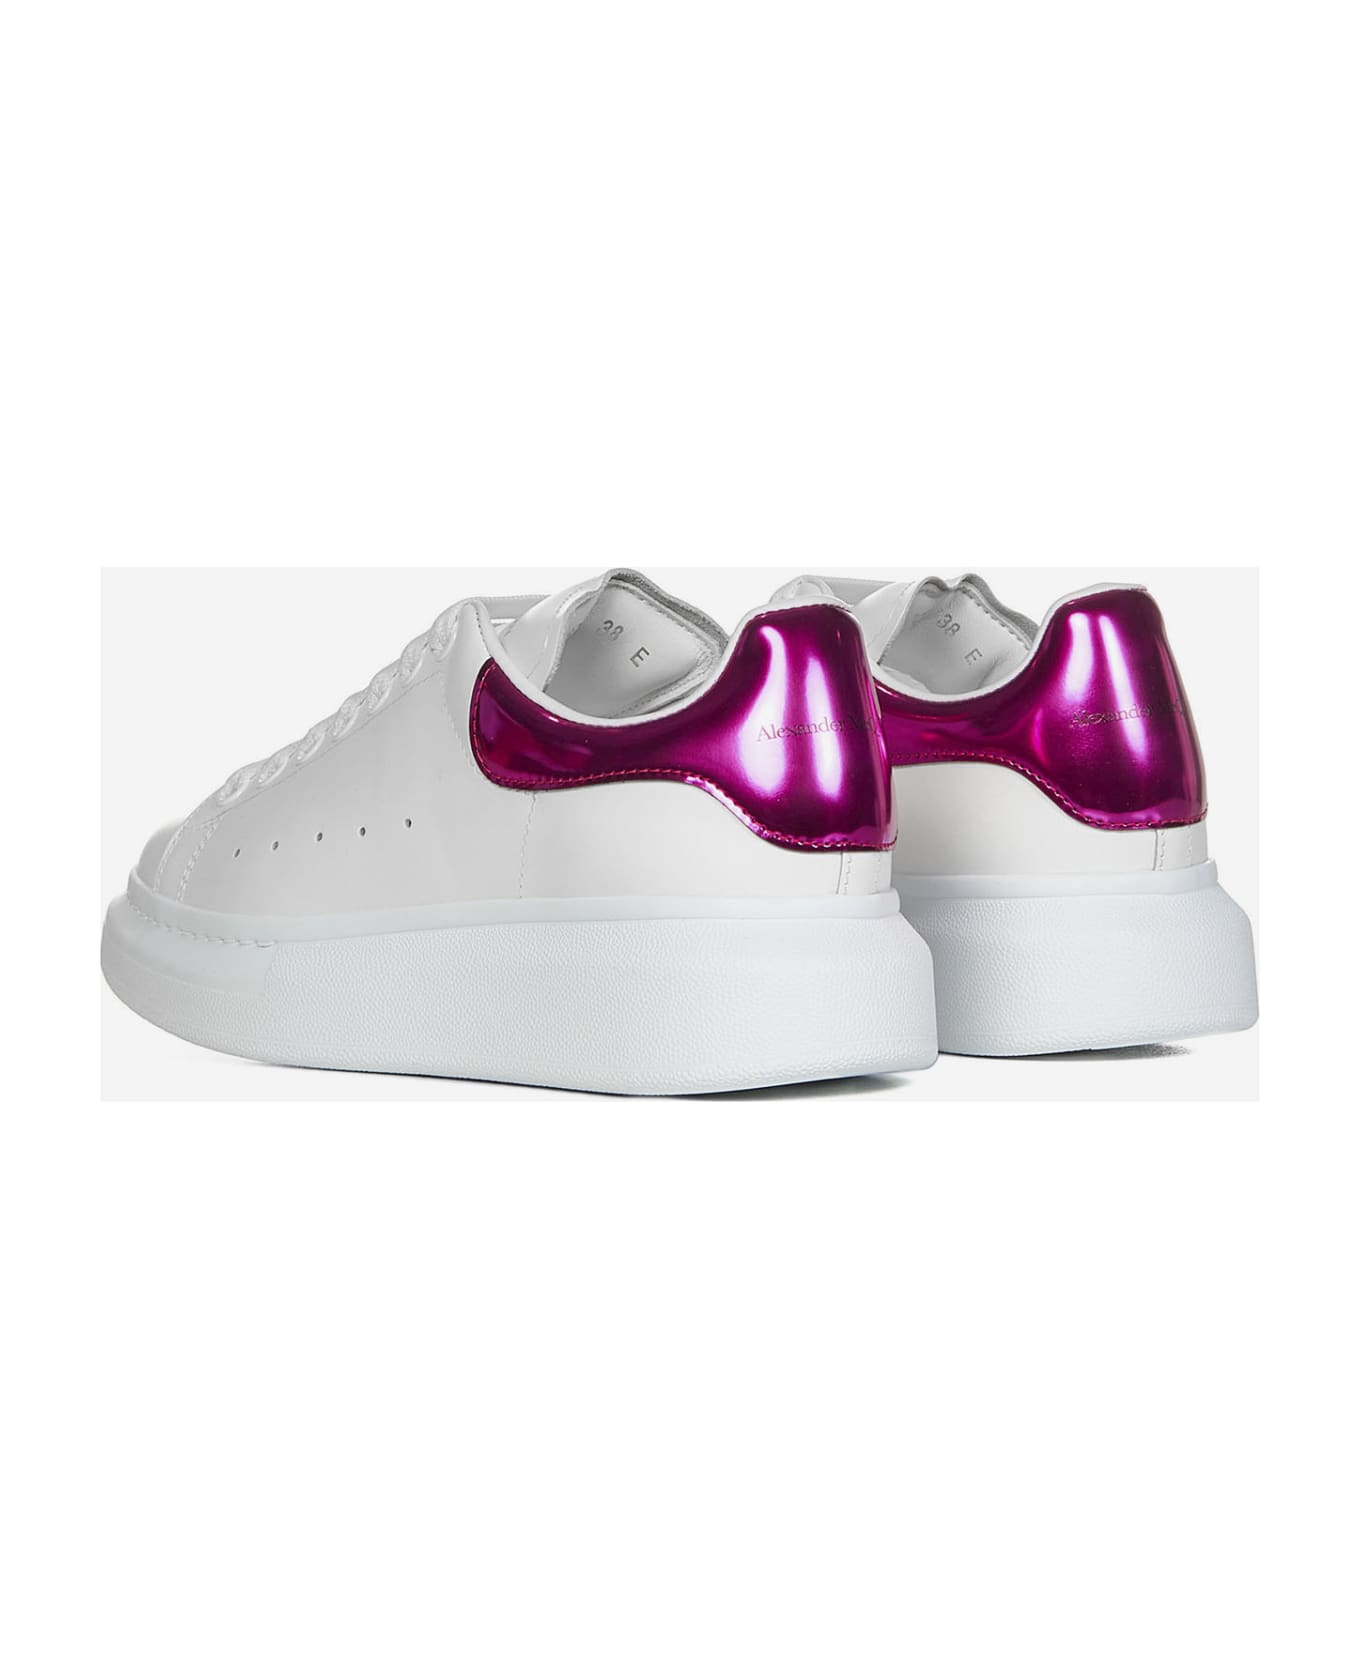 Alexander McQueen White Sneakers With Platform And Metallic Fuchsia Heel Tab In Leather Woman Alexander Mcqueen - White